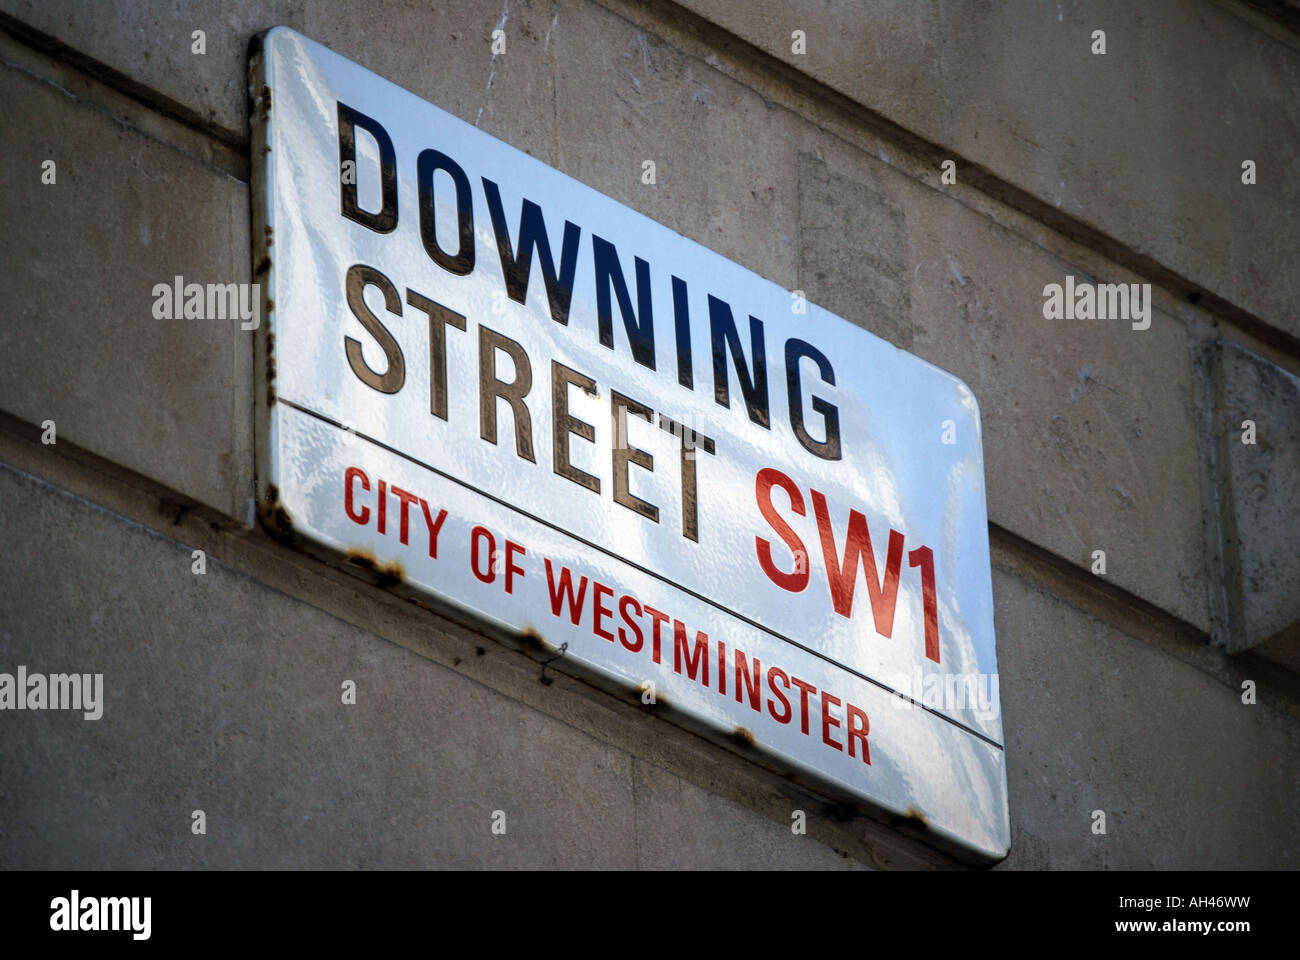 Downing Street Sign, Whitehall, City Of Westminster, Greater London, Inghilterra, Regno Unito Foto Stock